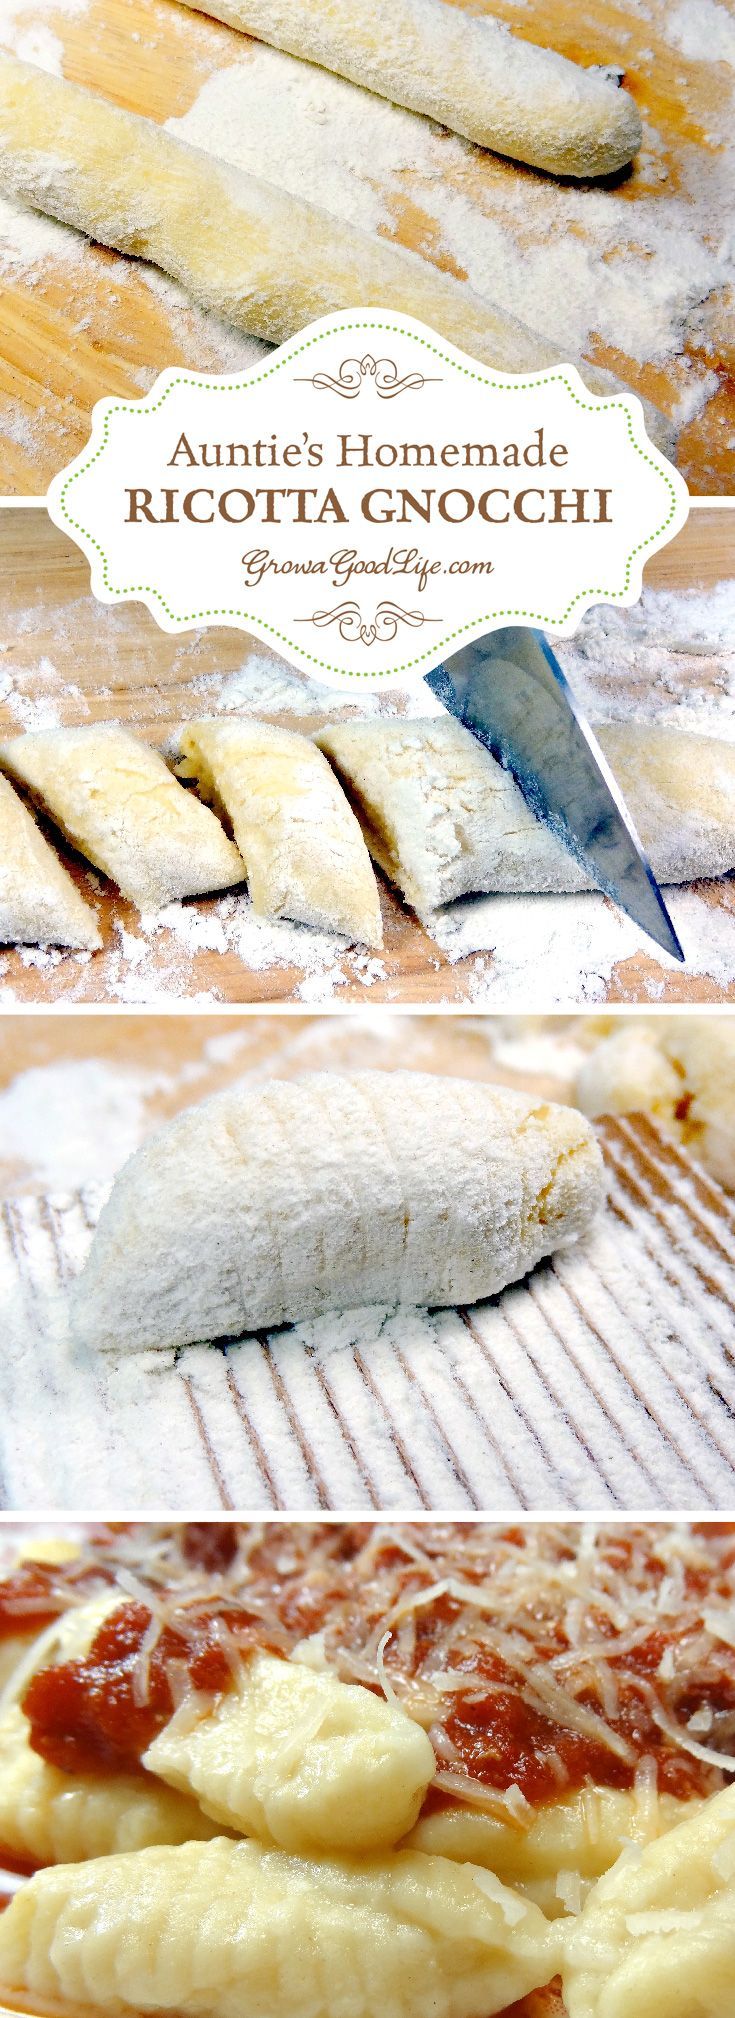 This homemade ricotta gnocchi recipe is based the way my Italian Great Aunt Mary made it. Auntie didn’t have a recipe, she